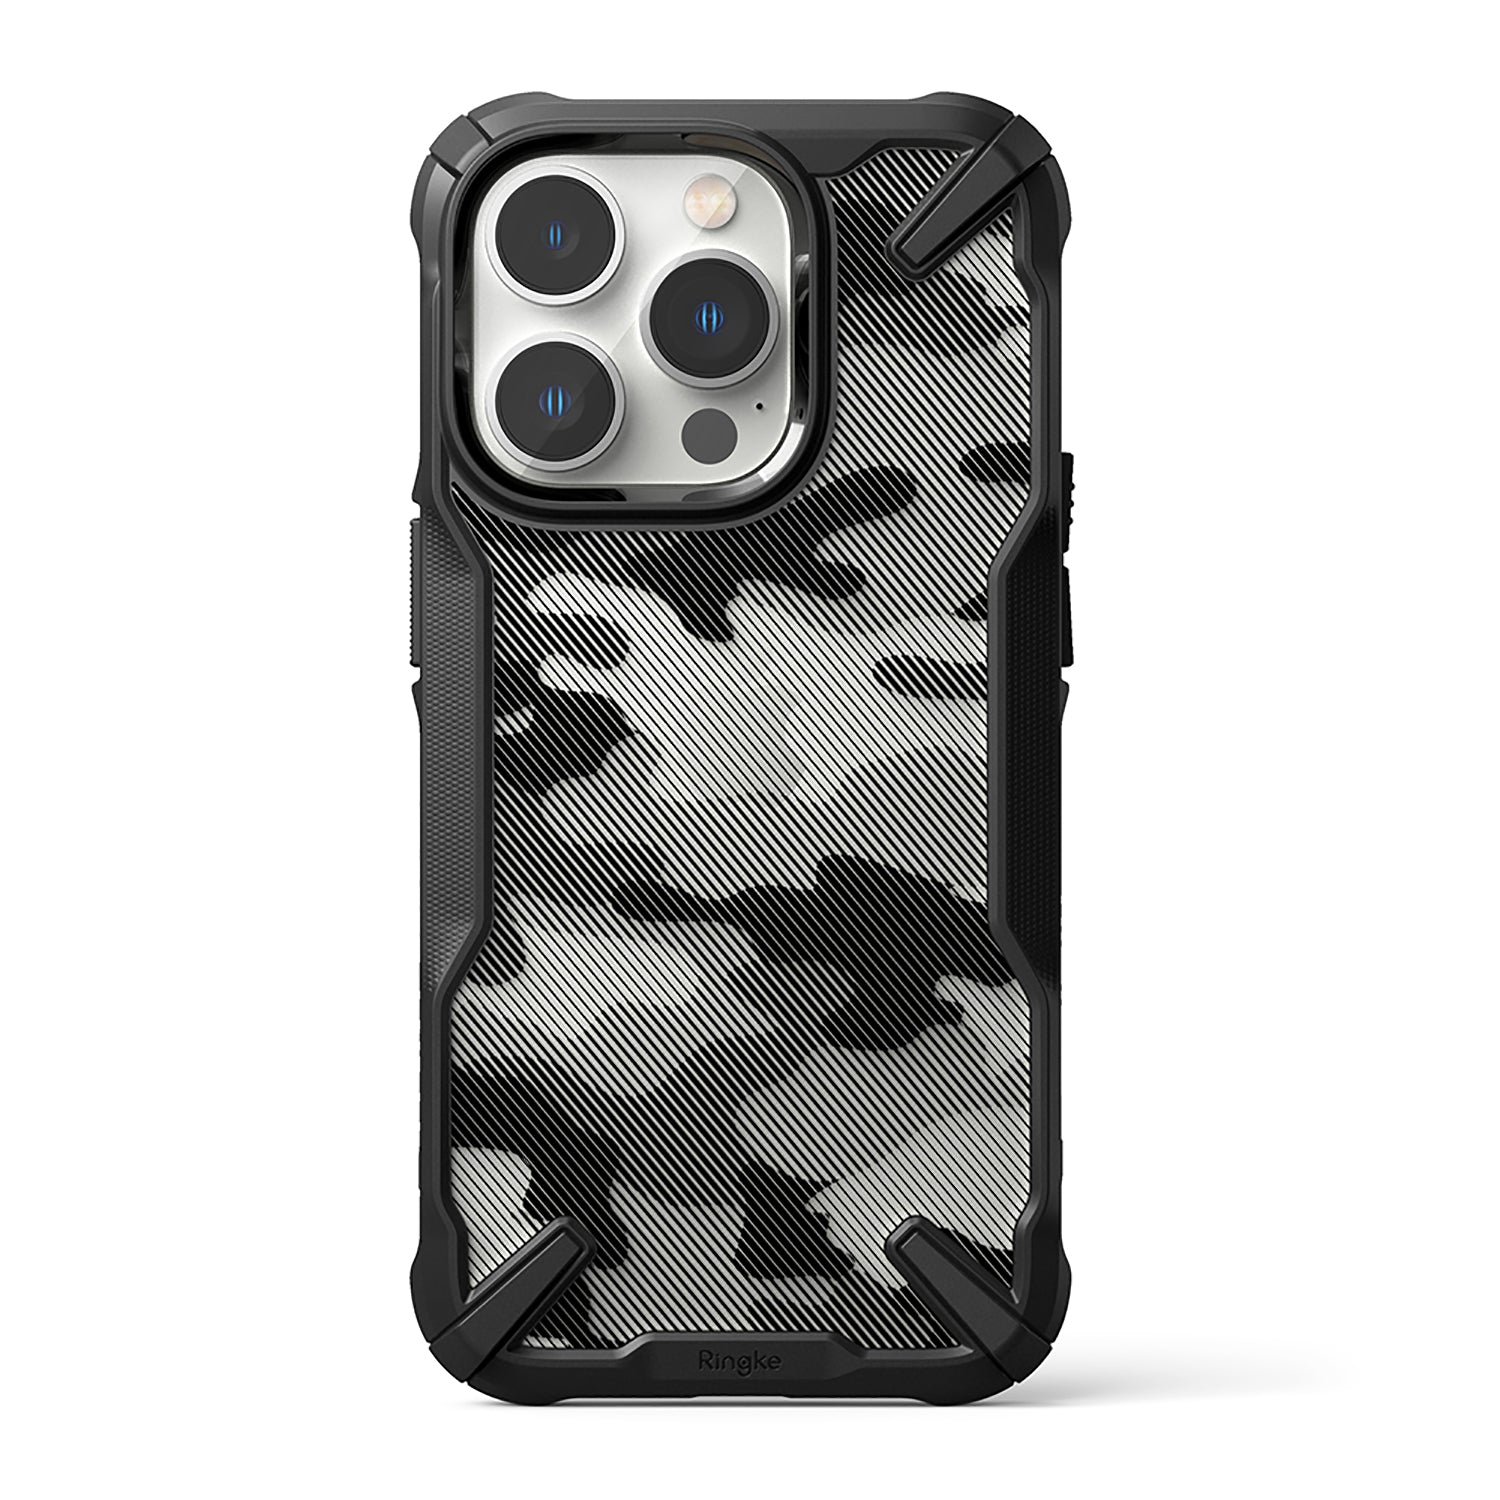 Ringke Fusion X Design Case for iPhone 14 6.1" Mobile Phone Cases Ringke iPhone 14 Pro 6.1" 